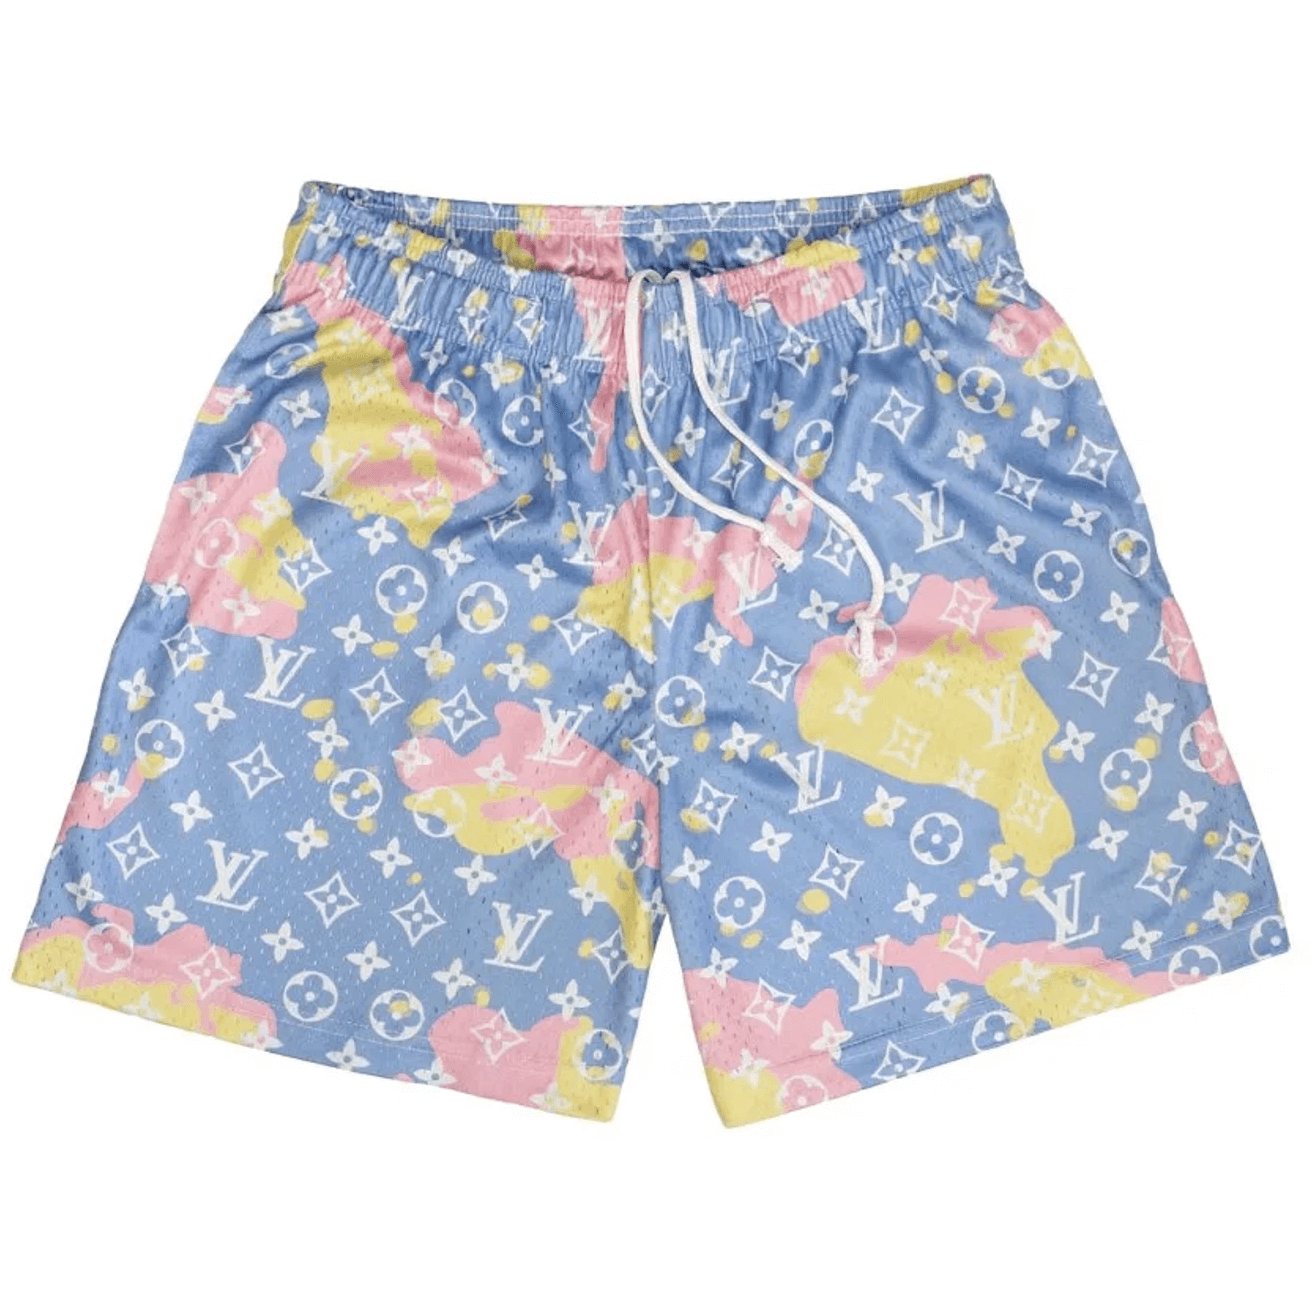 Bravest Studio Short LV Cotton Candy with Camo